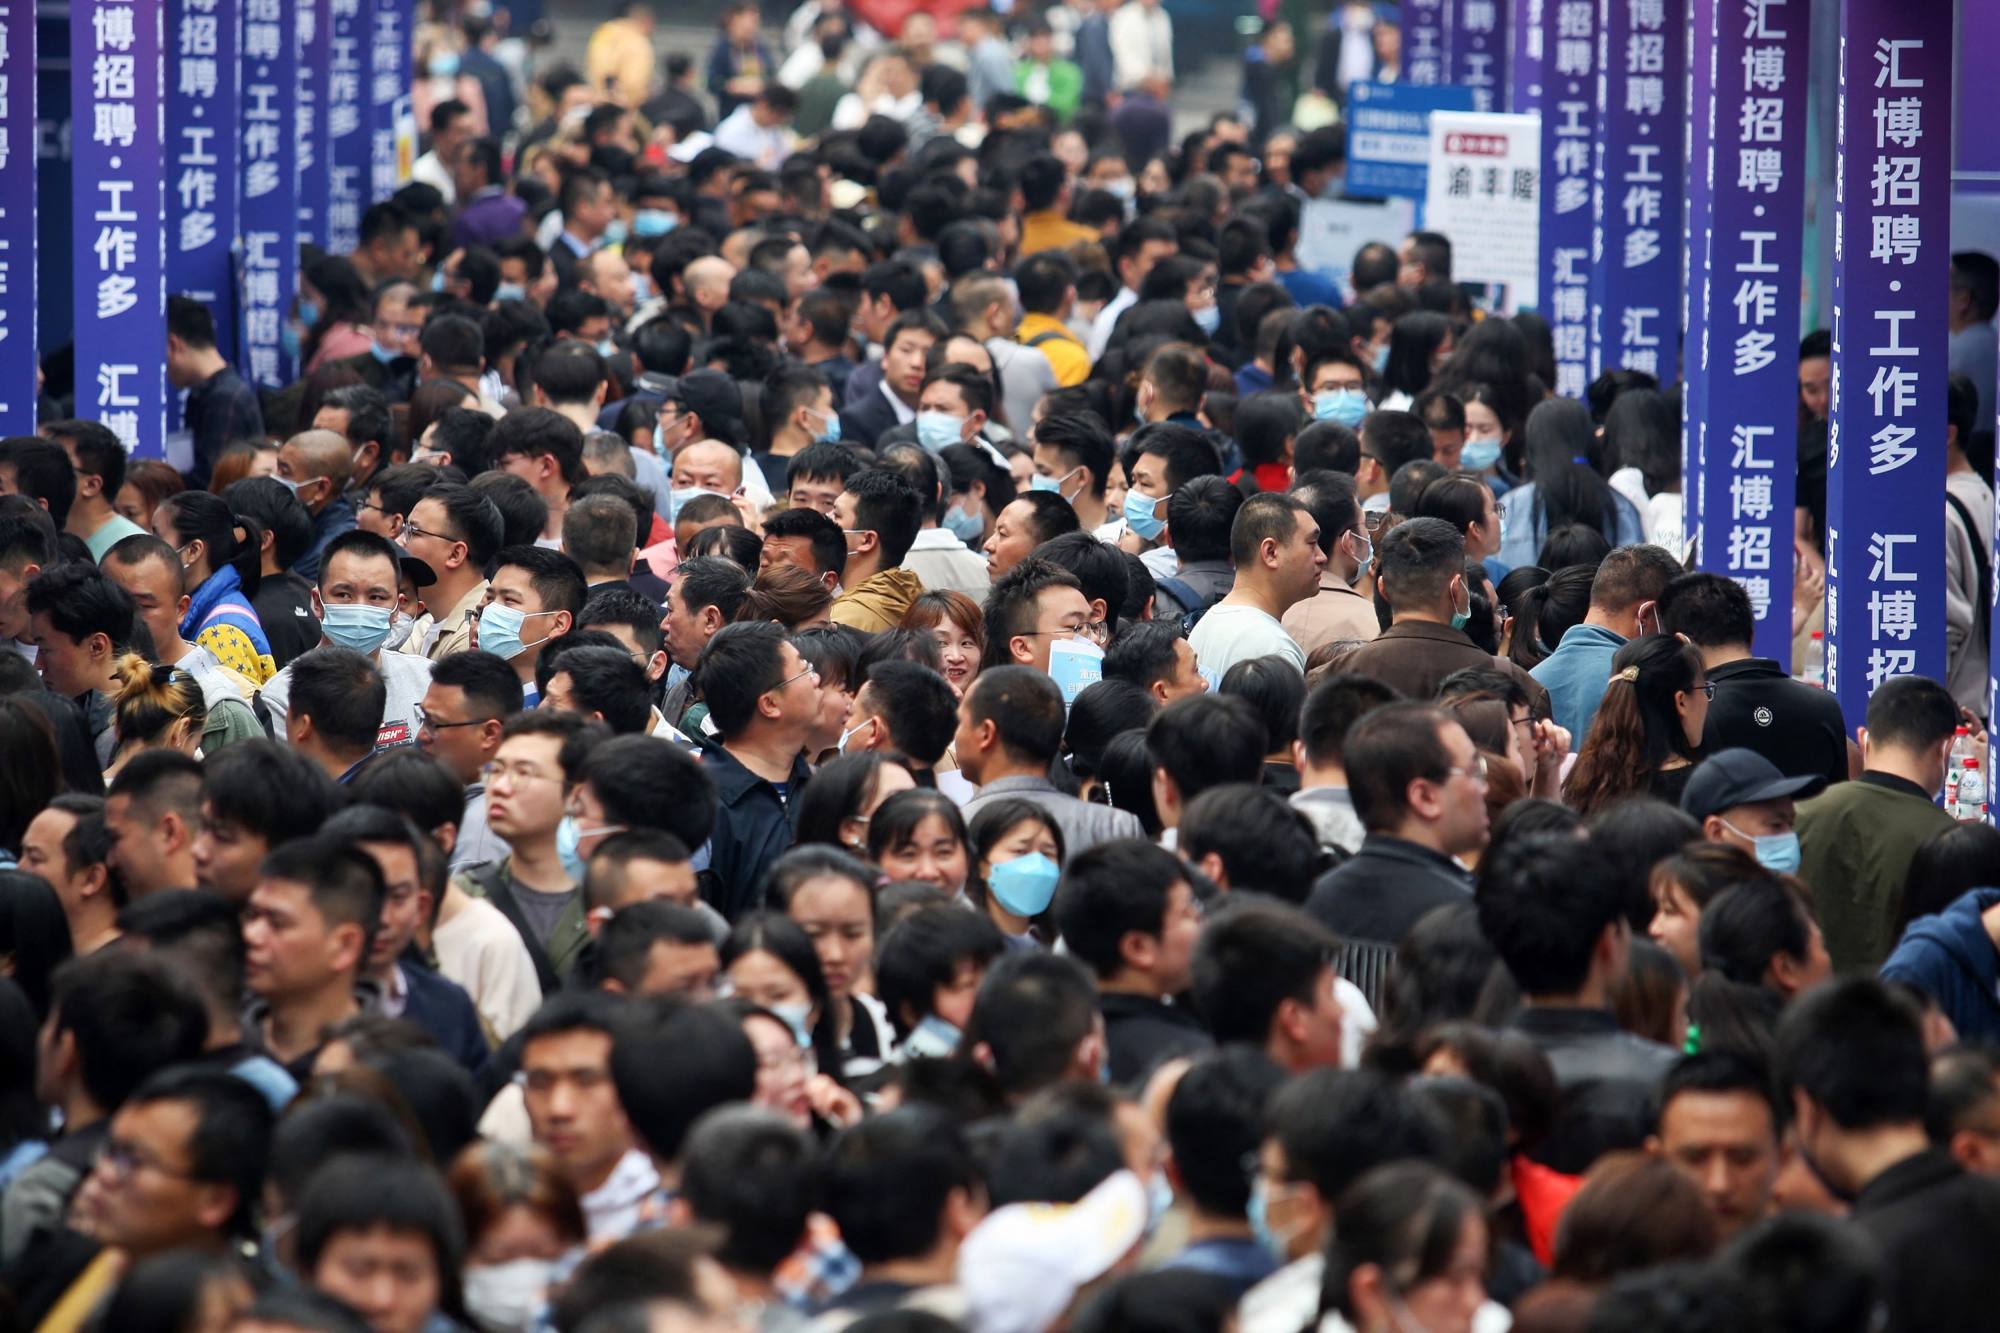 People attend a job fair in southwestern China’s Chongqing. Photo: AFP